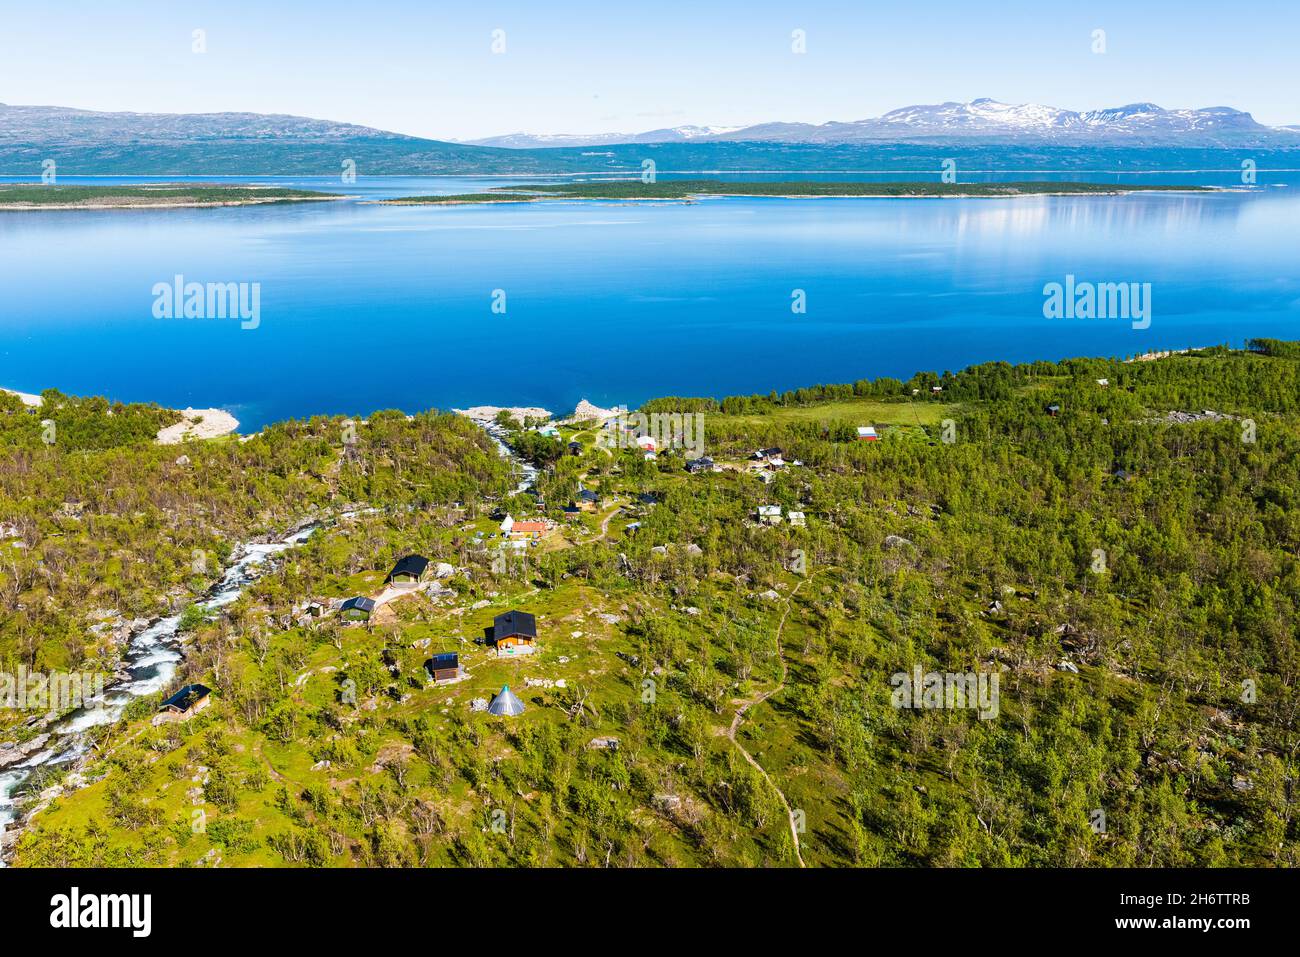 Aerial view of houses near lake Stock Photo